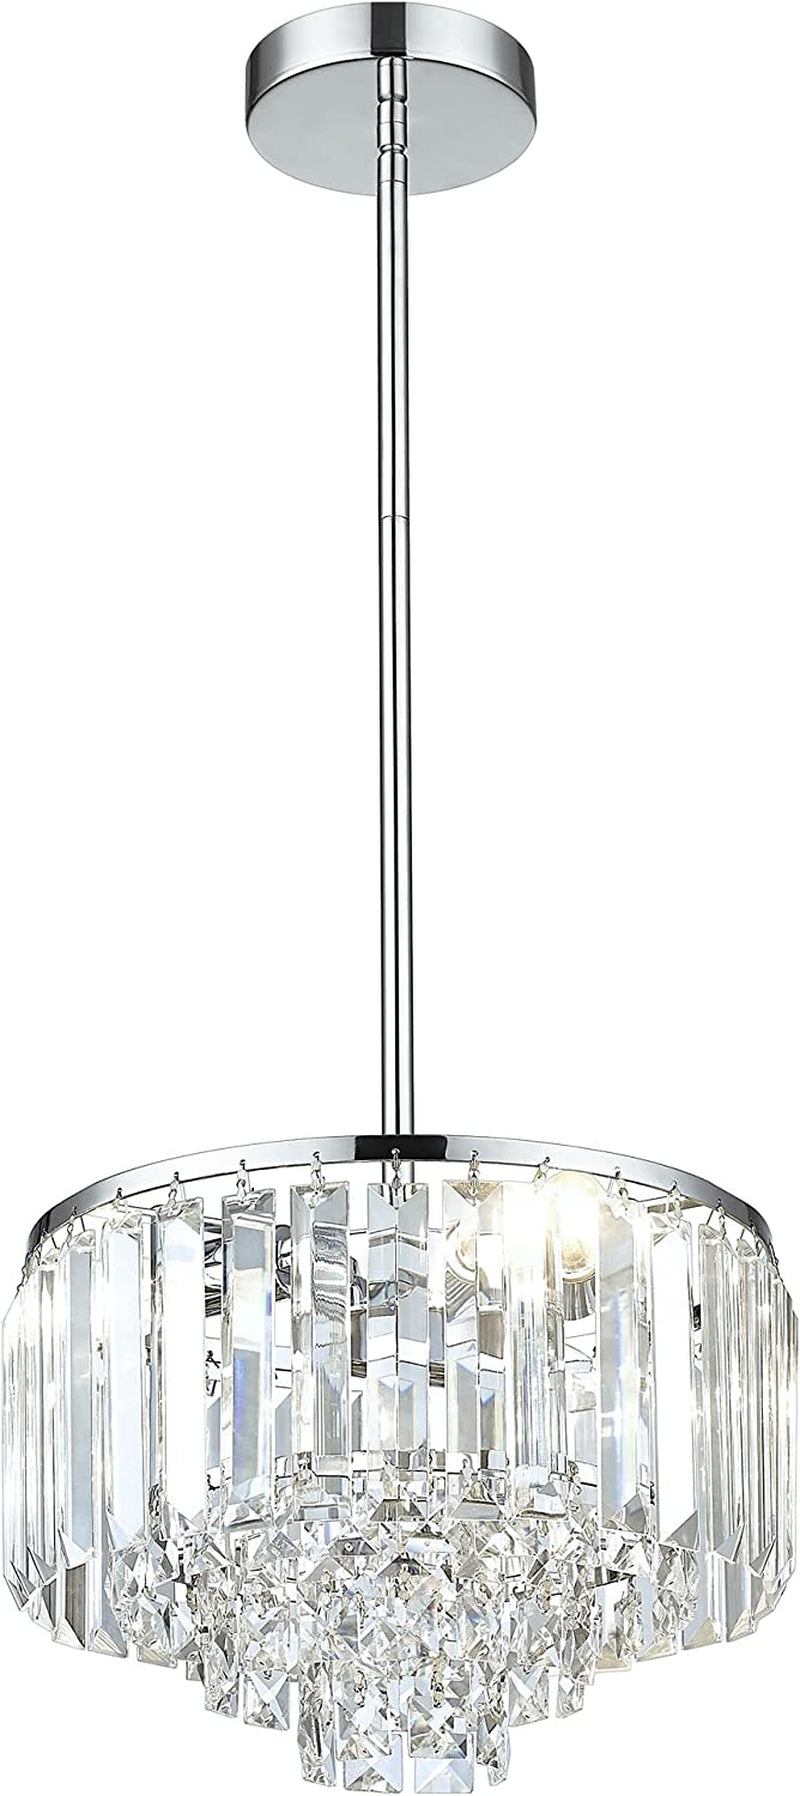 Cargifak Crystal Chandelier, 4-Tier Modern Chandelier with Polished Chrome Finish, Pendant Light for Dinning Room Kitchen Island Bedroom Entryway, CC4215-3W-PC